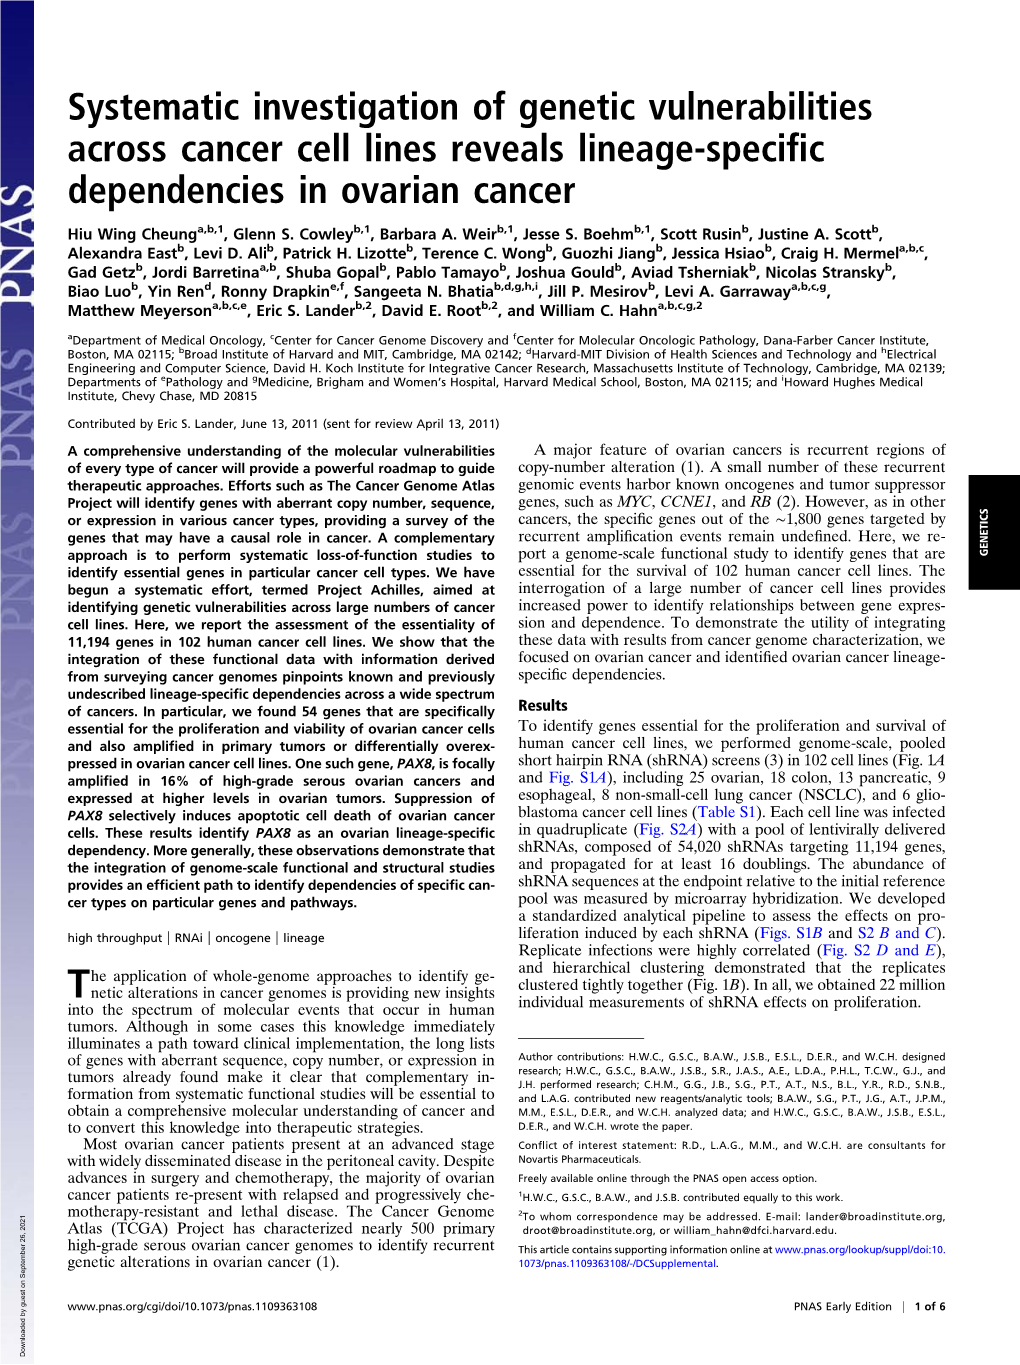 Systematic Investigation of Genetic Vulnerabilities Across Cancer Cell Lines Reveals Lineage-Speciﬁc Dependencies in Ovarian Cancer